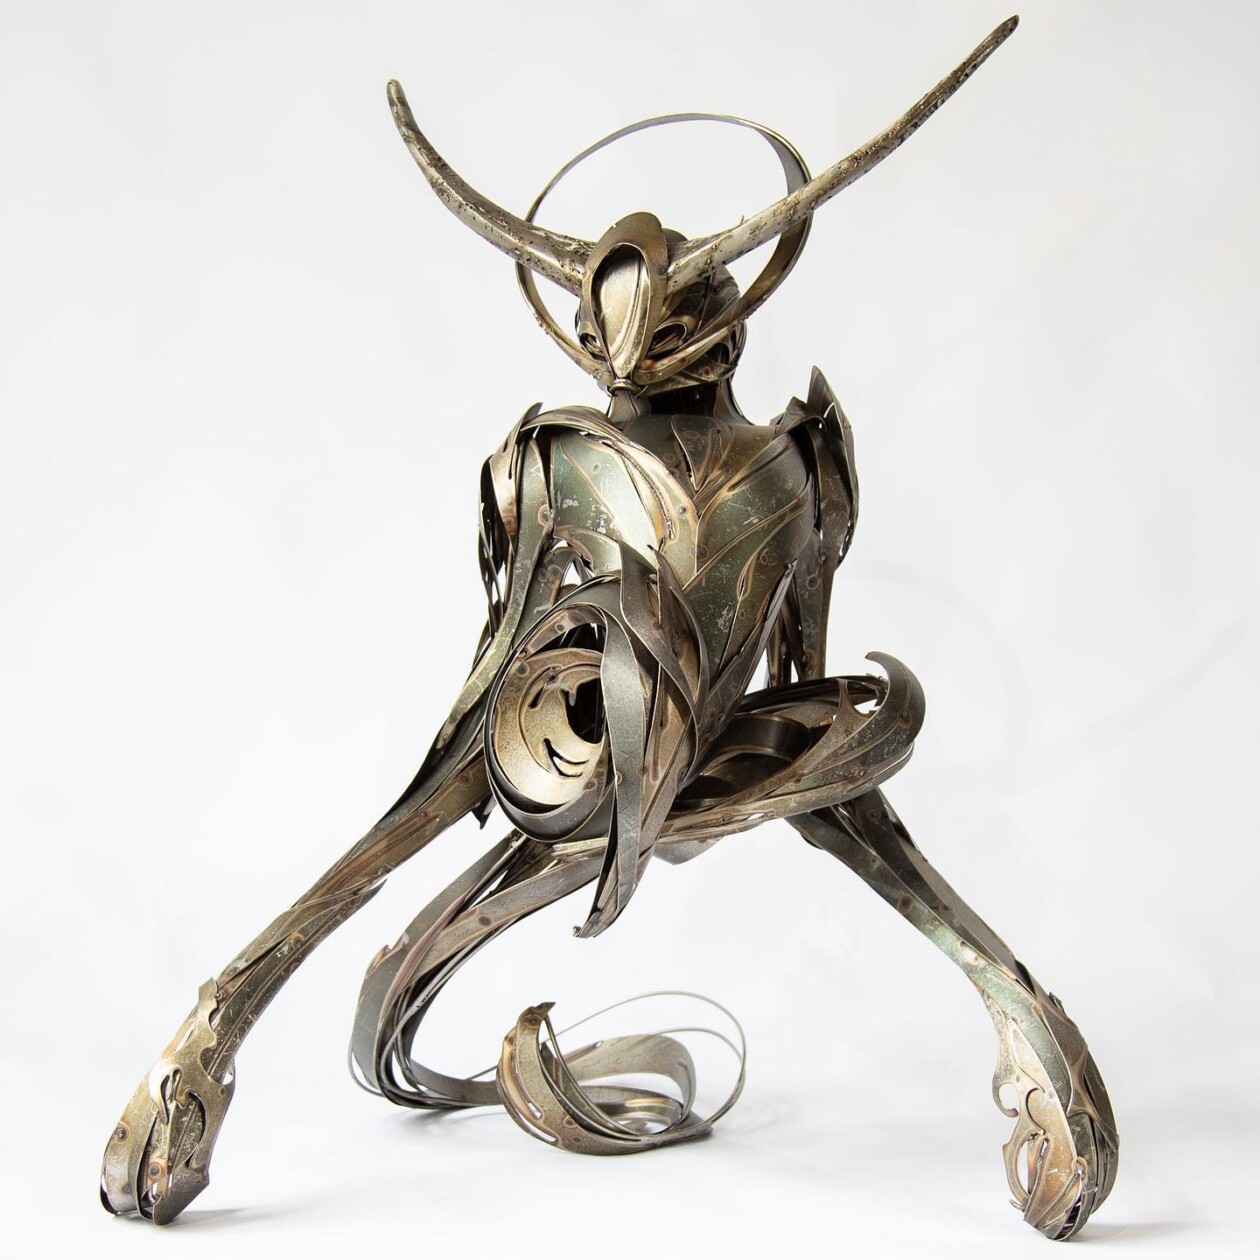 Magnificent Metallic Animal Sculptures Made With Sweeping Lines By Georgie Seccull (3)